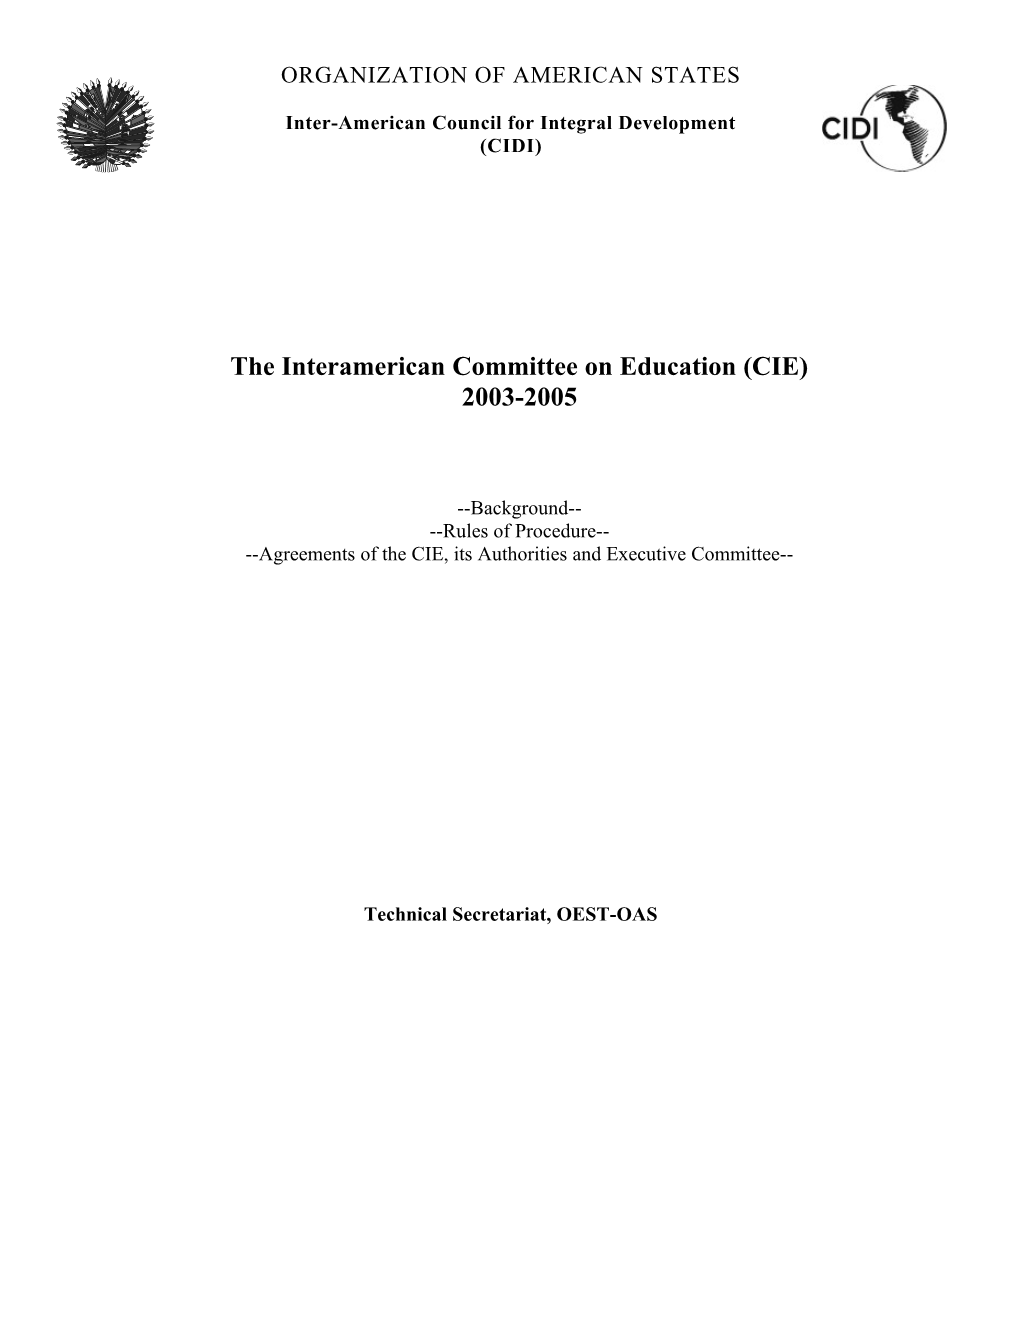 Agreements of the Interamerican Committee on Education (CIE) and Its Authorities and Executive